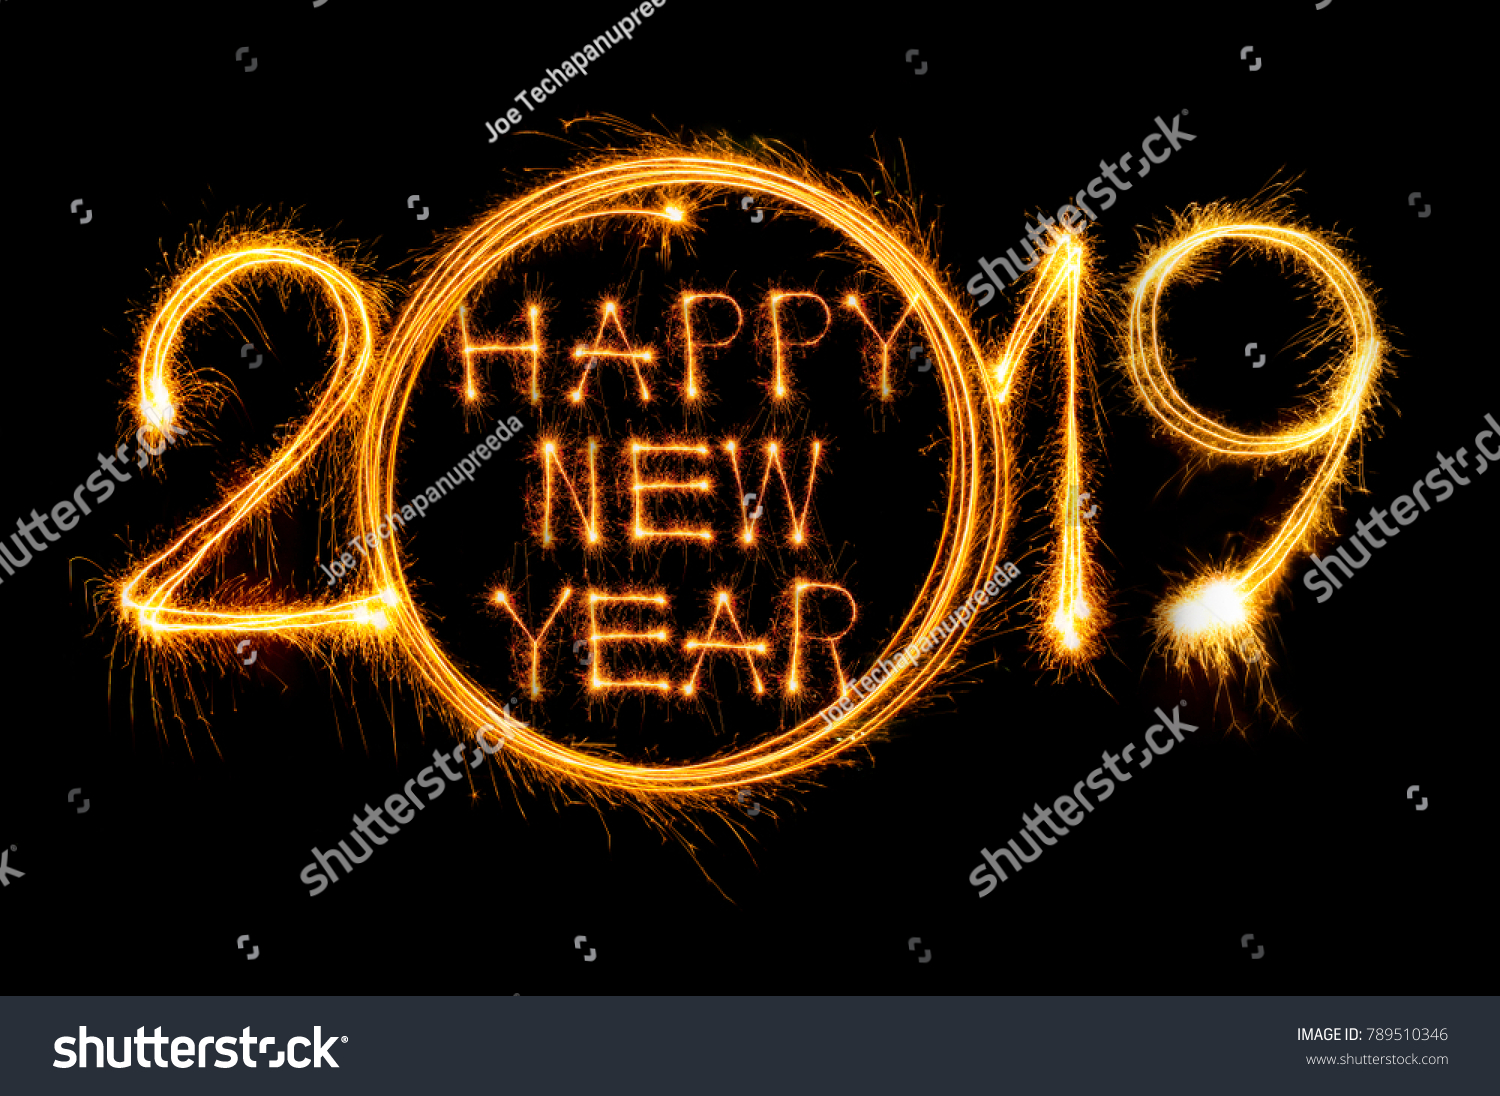 Happy new year 2019 text written with Sparkle fireworks isolated on black background #789510346